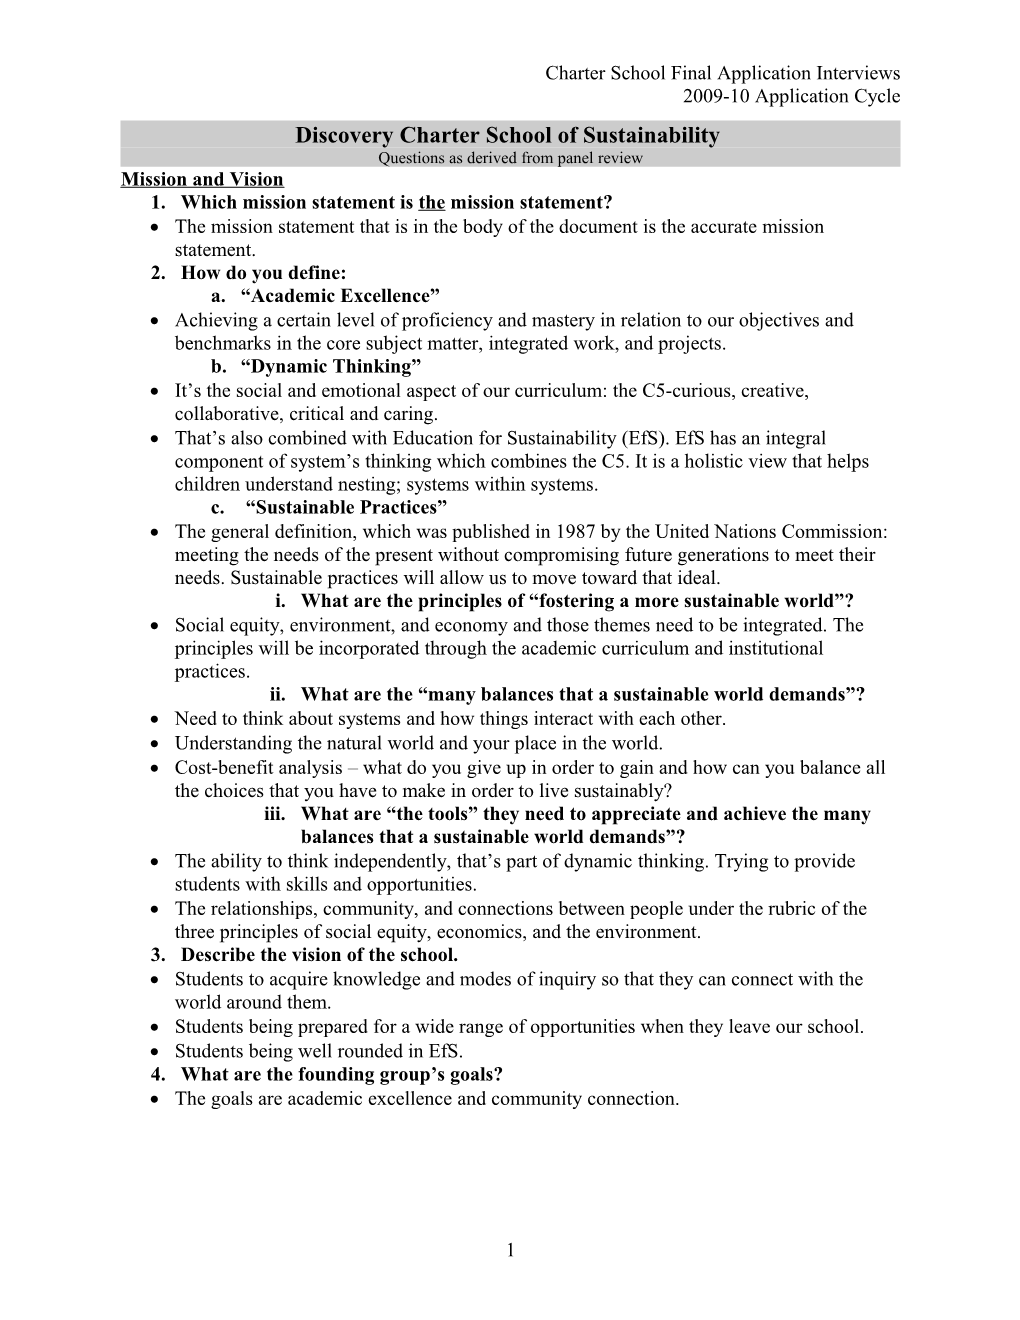 Discovery Charter School Of Sustainability, Standard Interview Questions For Founding Groups, February 2010